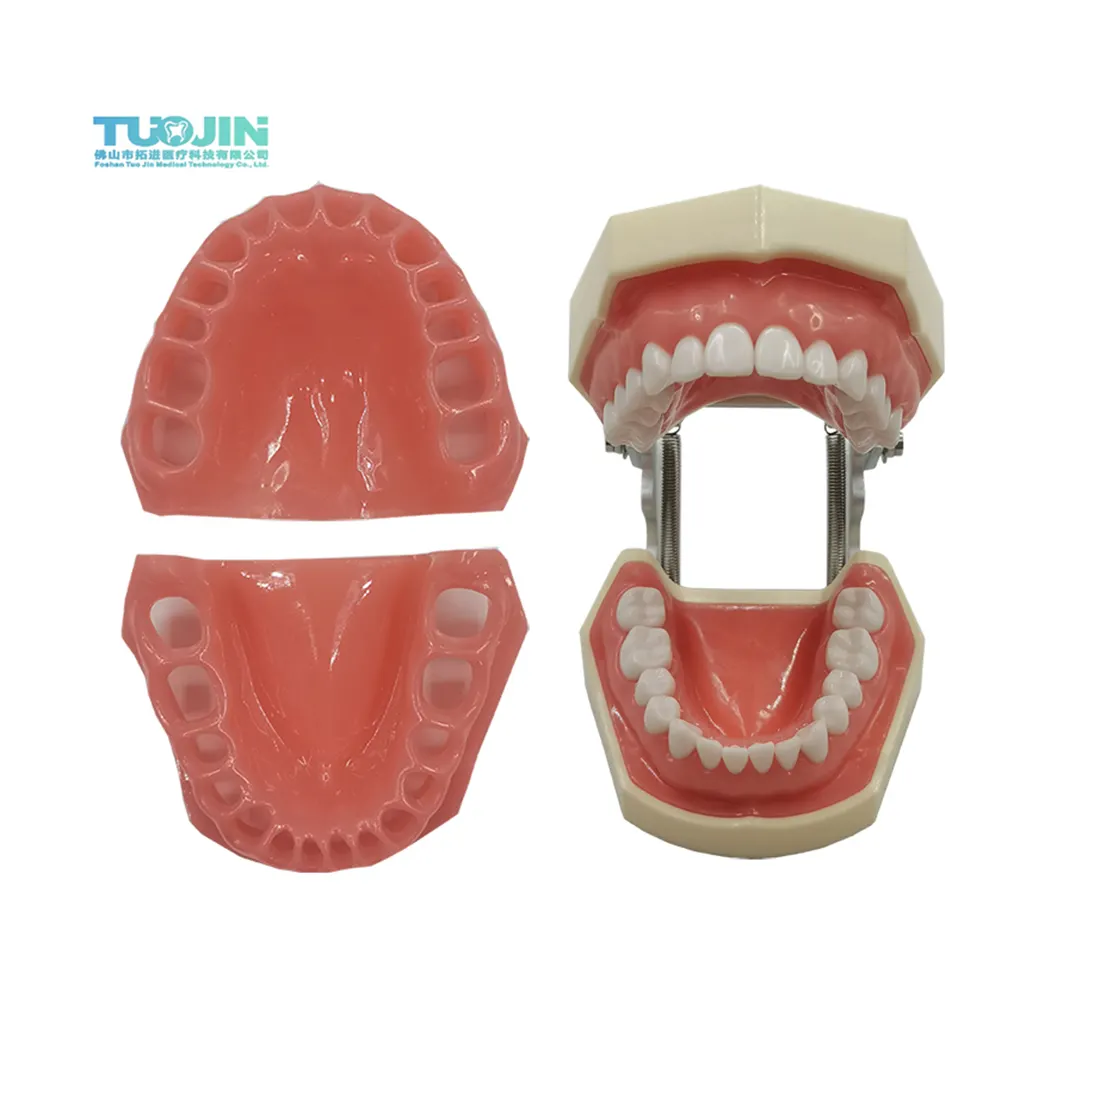 Dental Education Gingiva Supplies Standard Tooth Model Soft Gum Typodont Silicone Soft Jaw for Dentistry Practice